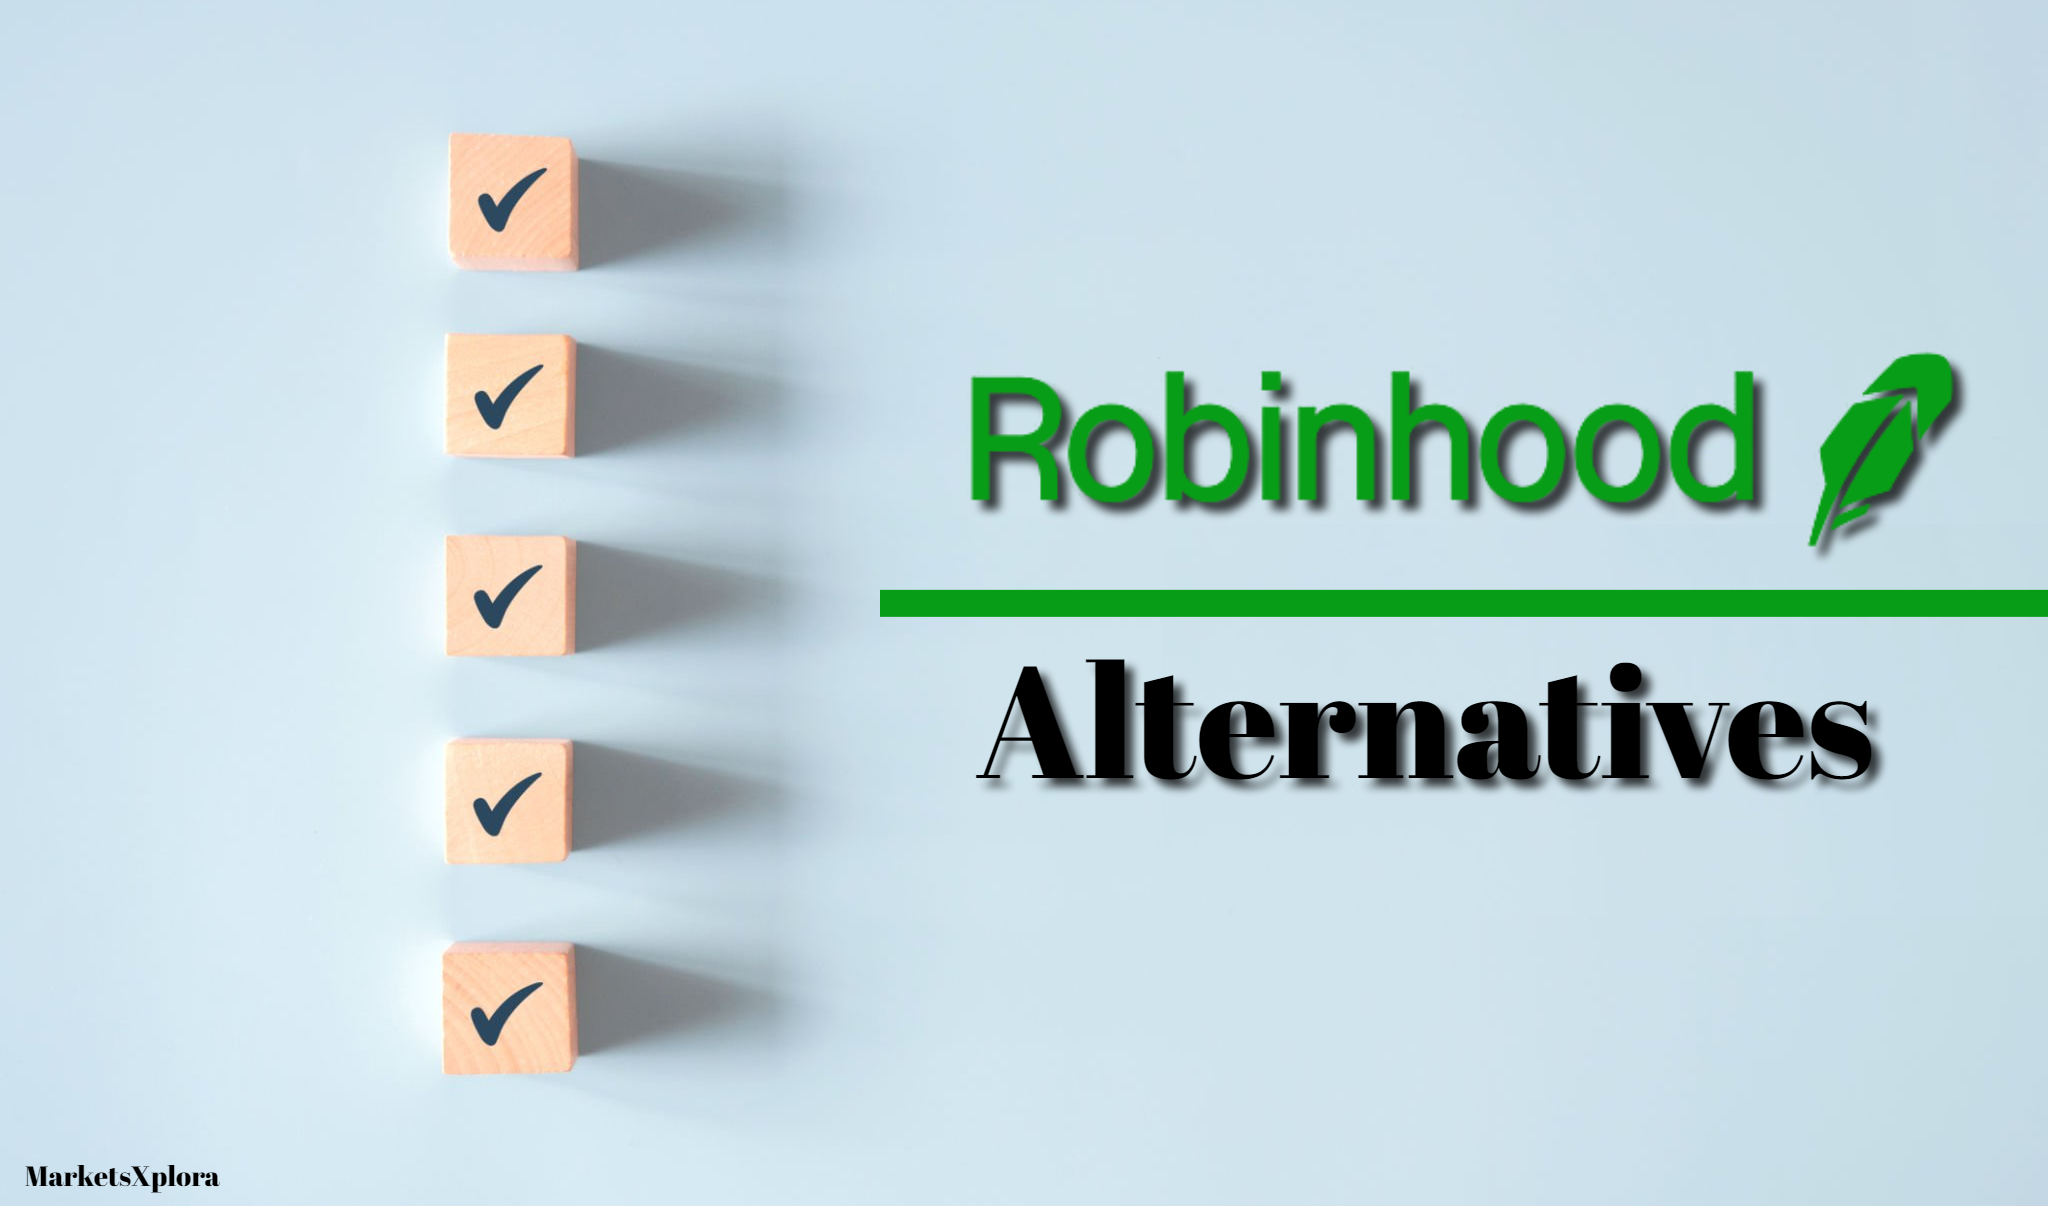 Seeking Robinhood alternatives with $0 trades, top-notch research, and retirement offerings? Explore in-depth reviews of Fidelity, E*TRADE, Schwab, TD Ameritrade, and more in this must-read guide.